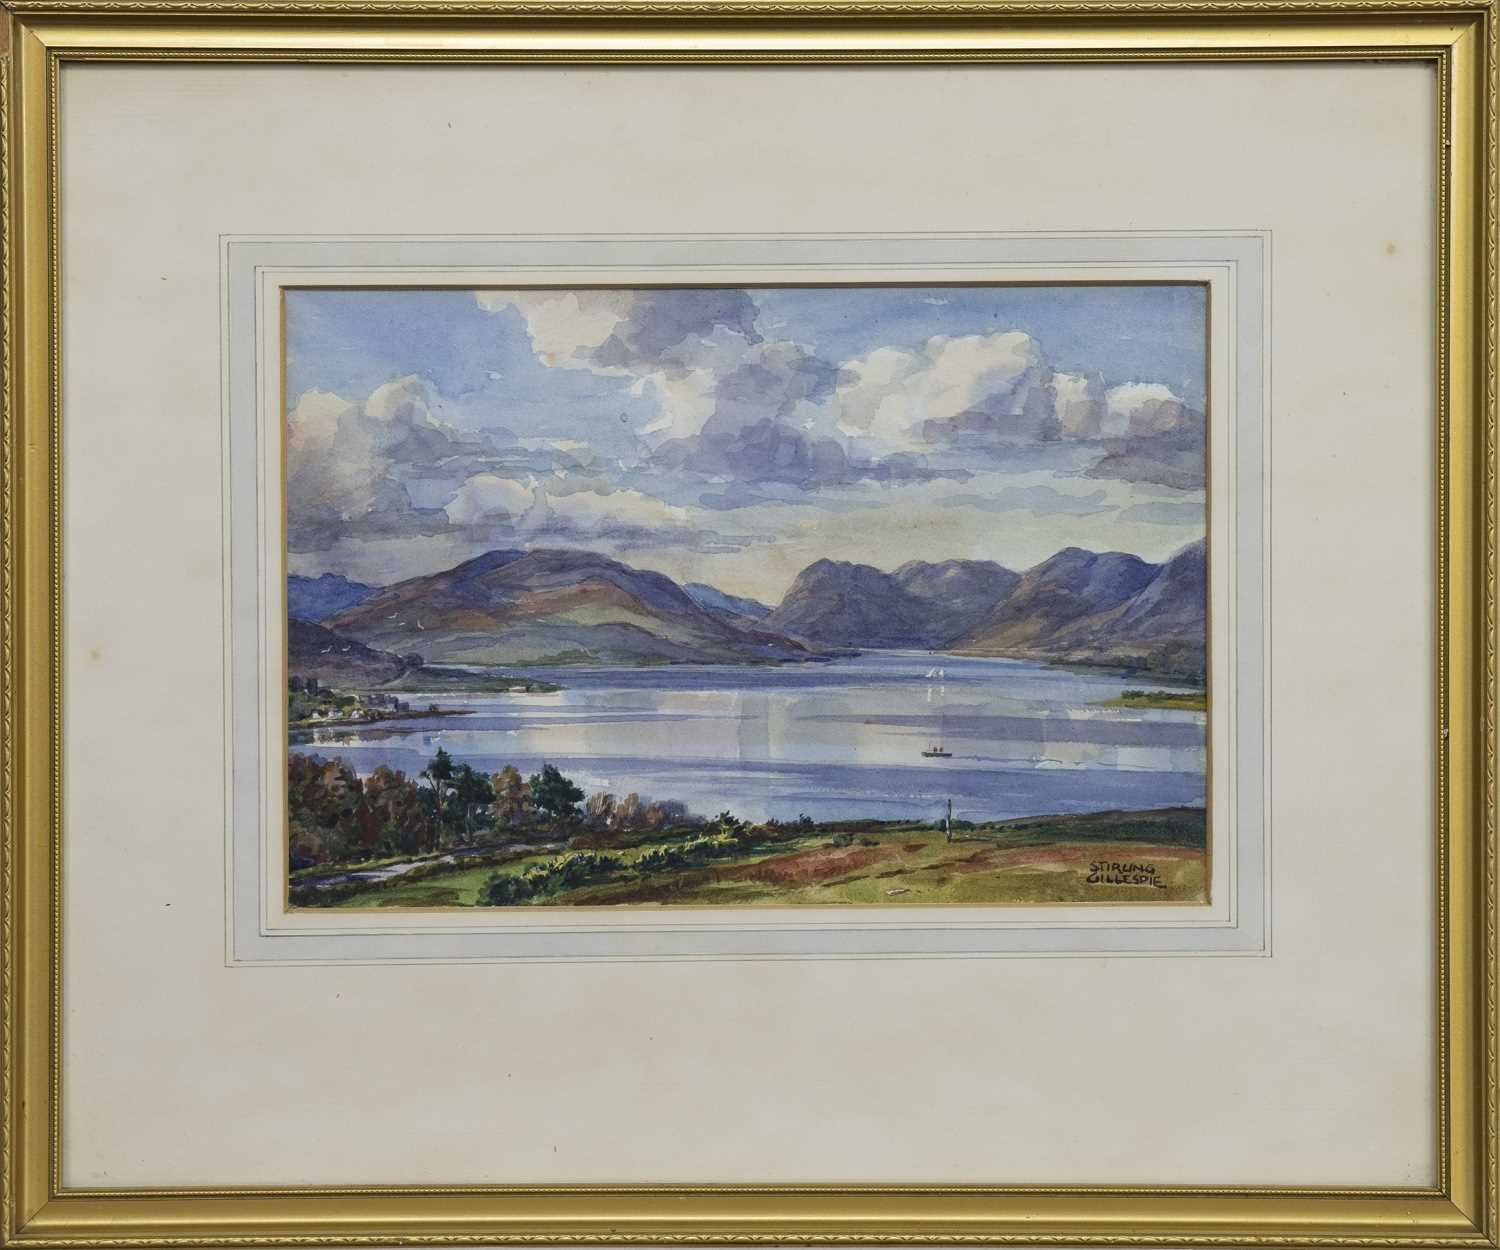 "THOUSAND POUND VIEW", KYLES AND LOCH STRIVEN FROM CANADA HILL, A WATERCOLOUR STIRLING GILLESPIE